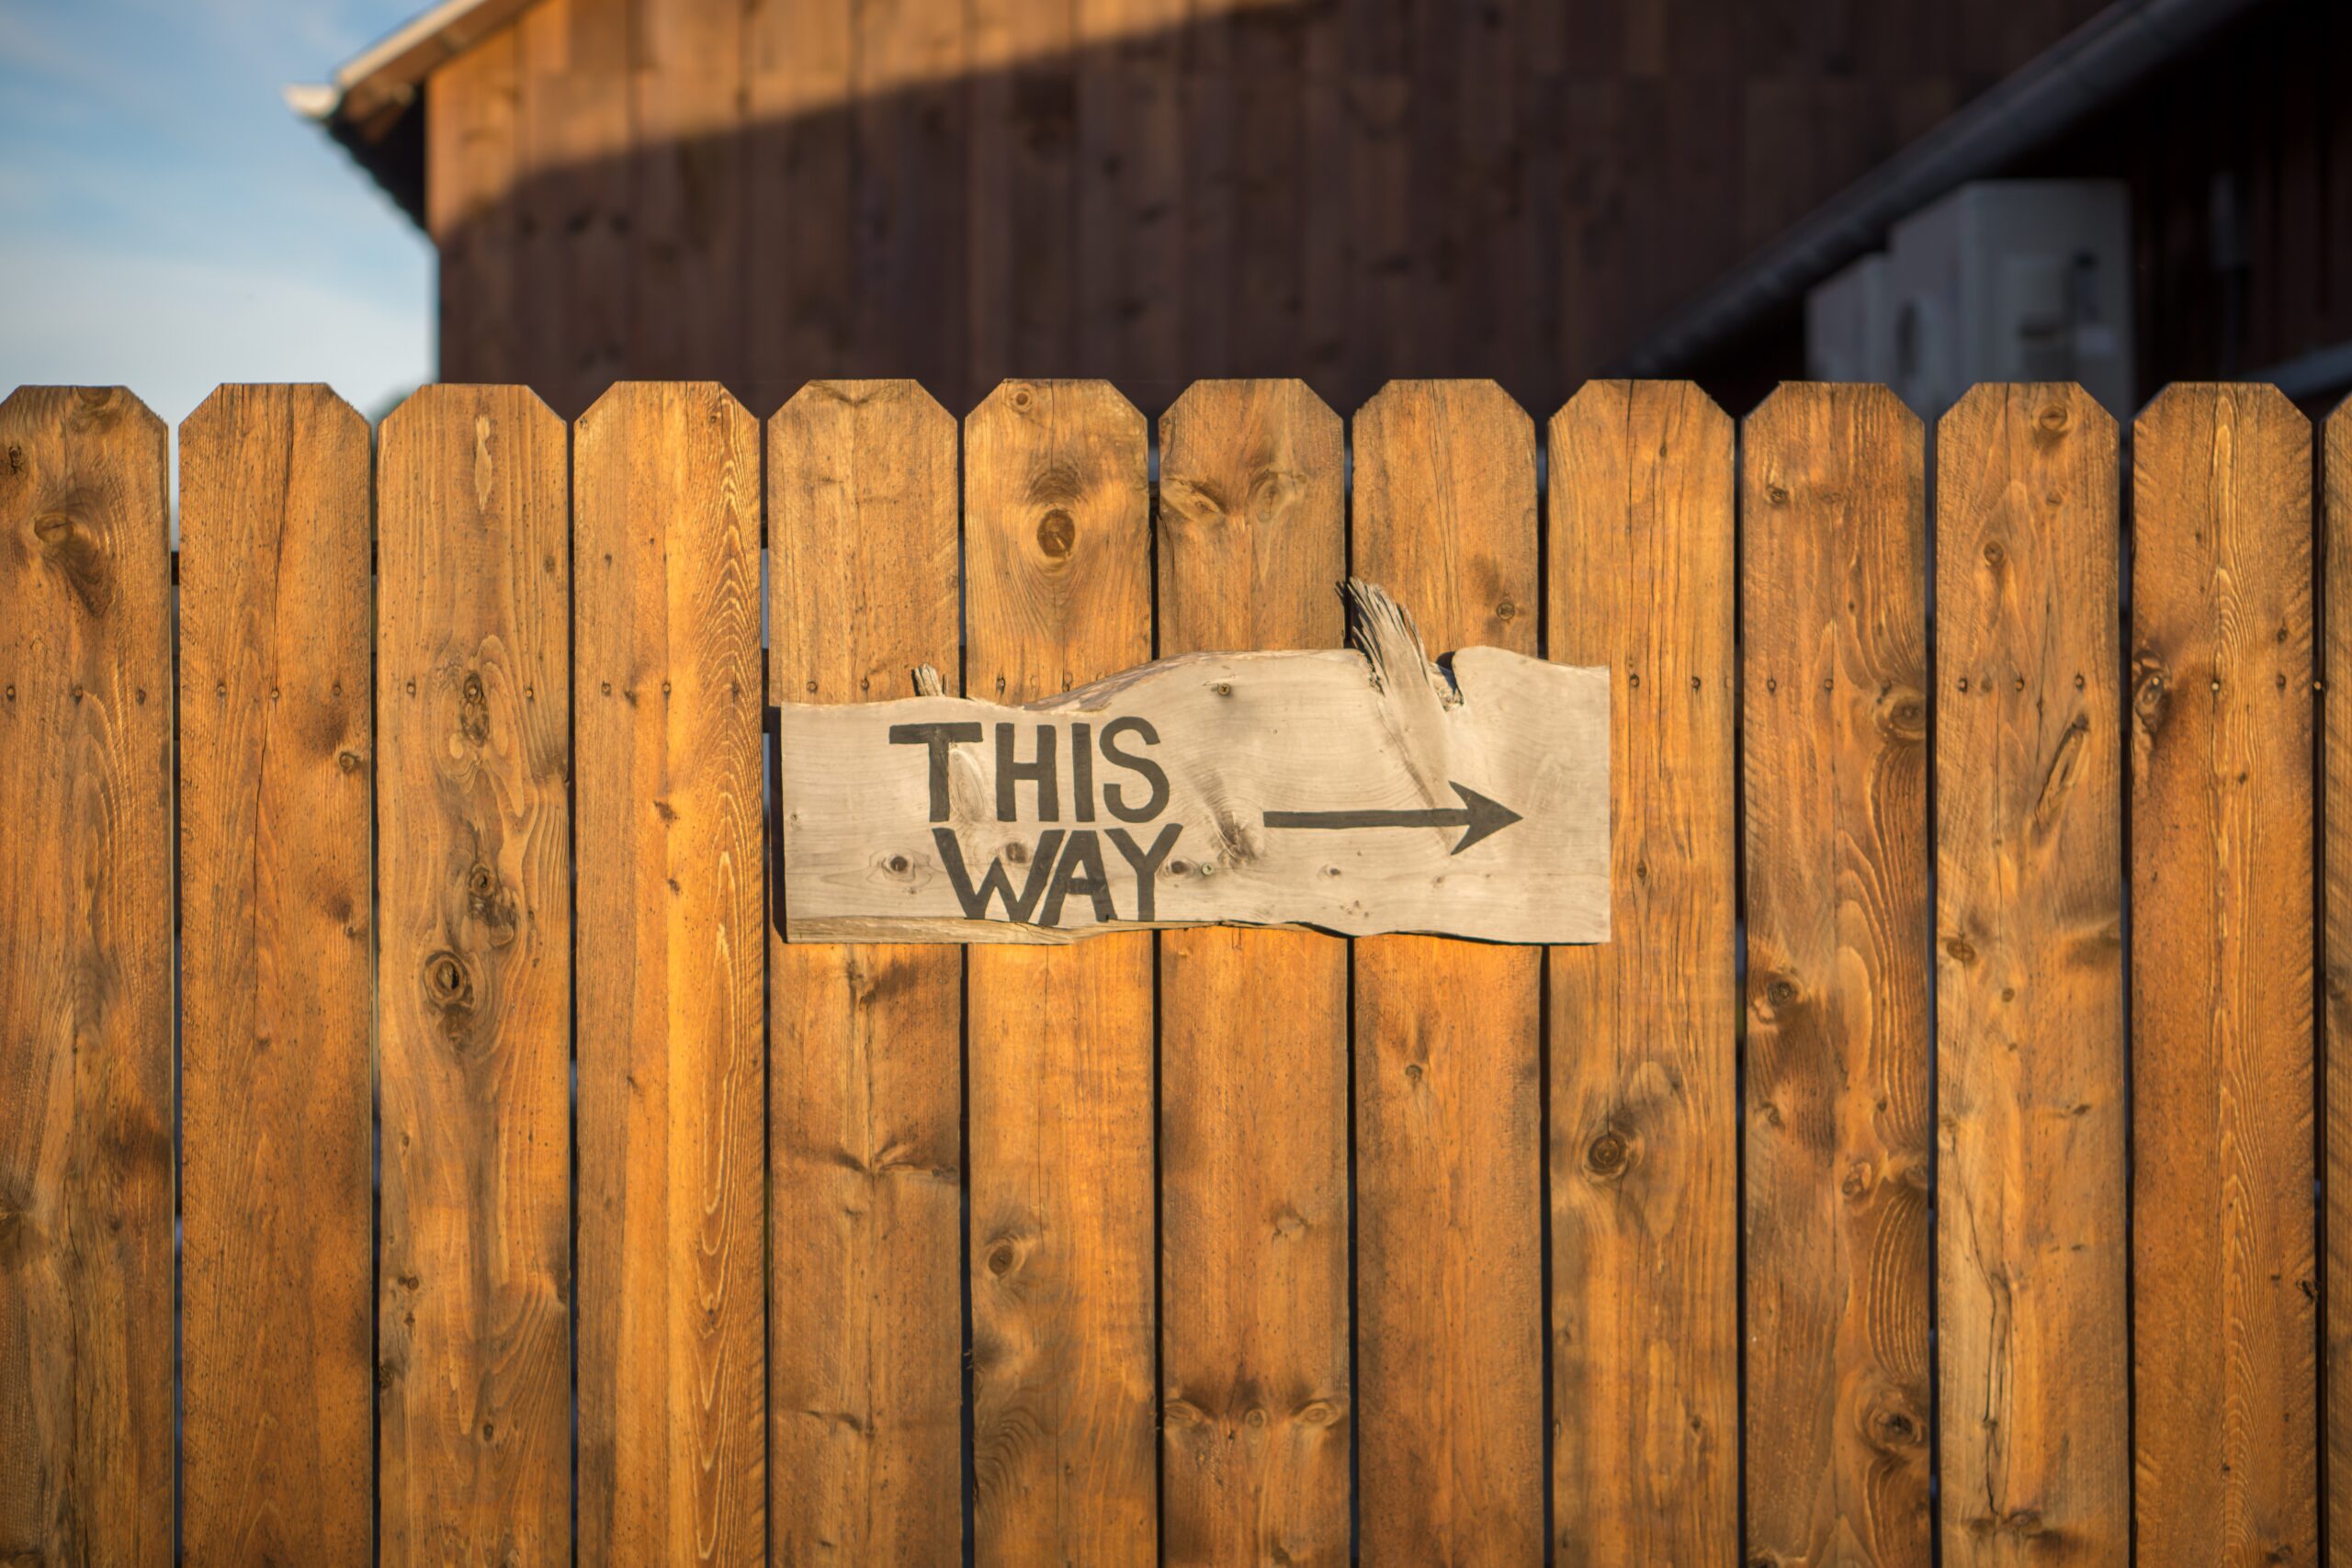 A cardboard sign pinned to a brown wood fences reads "this way," with an arrow pointing to the right.